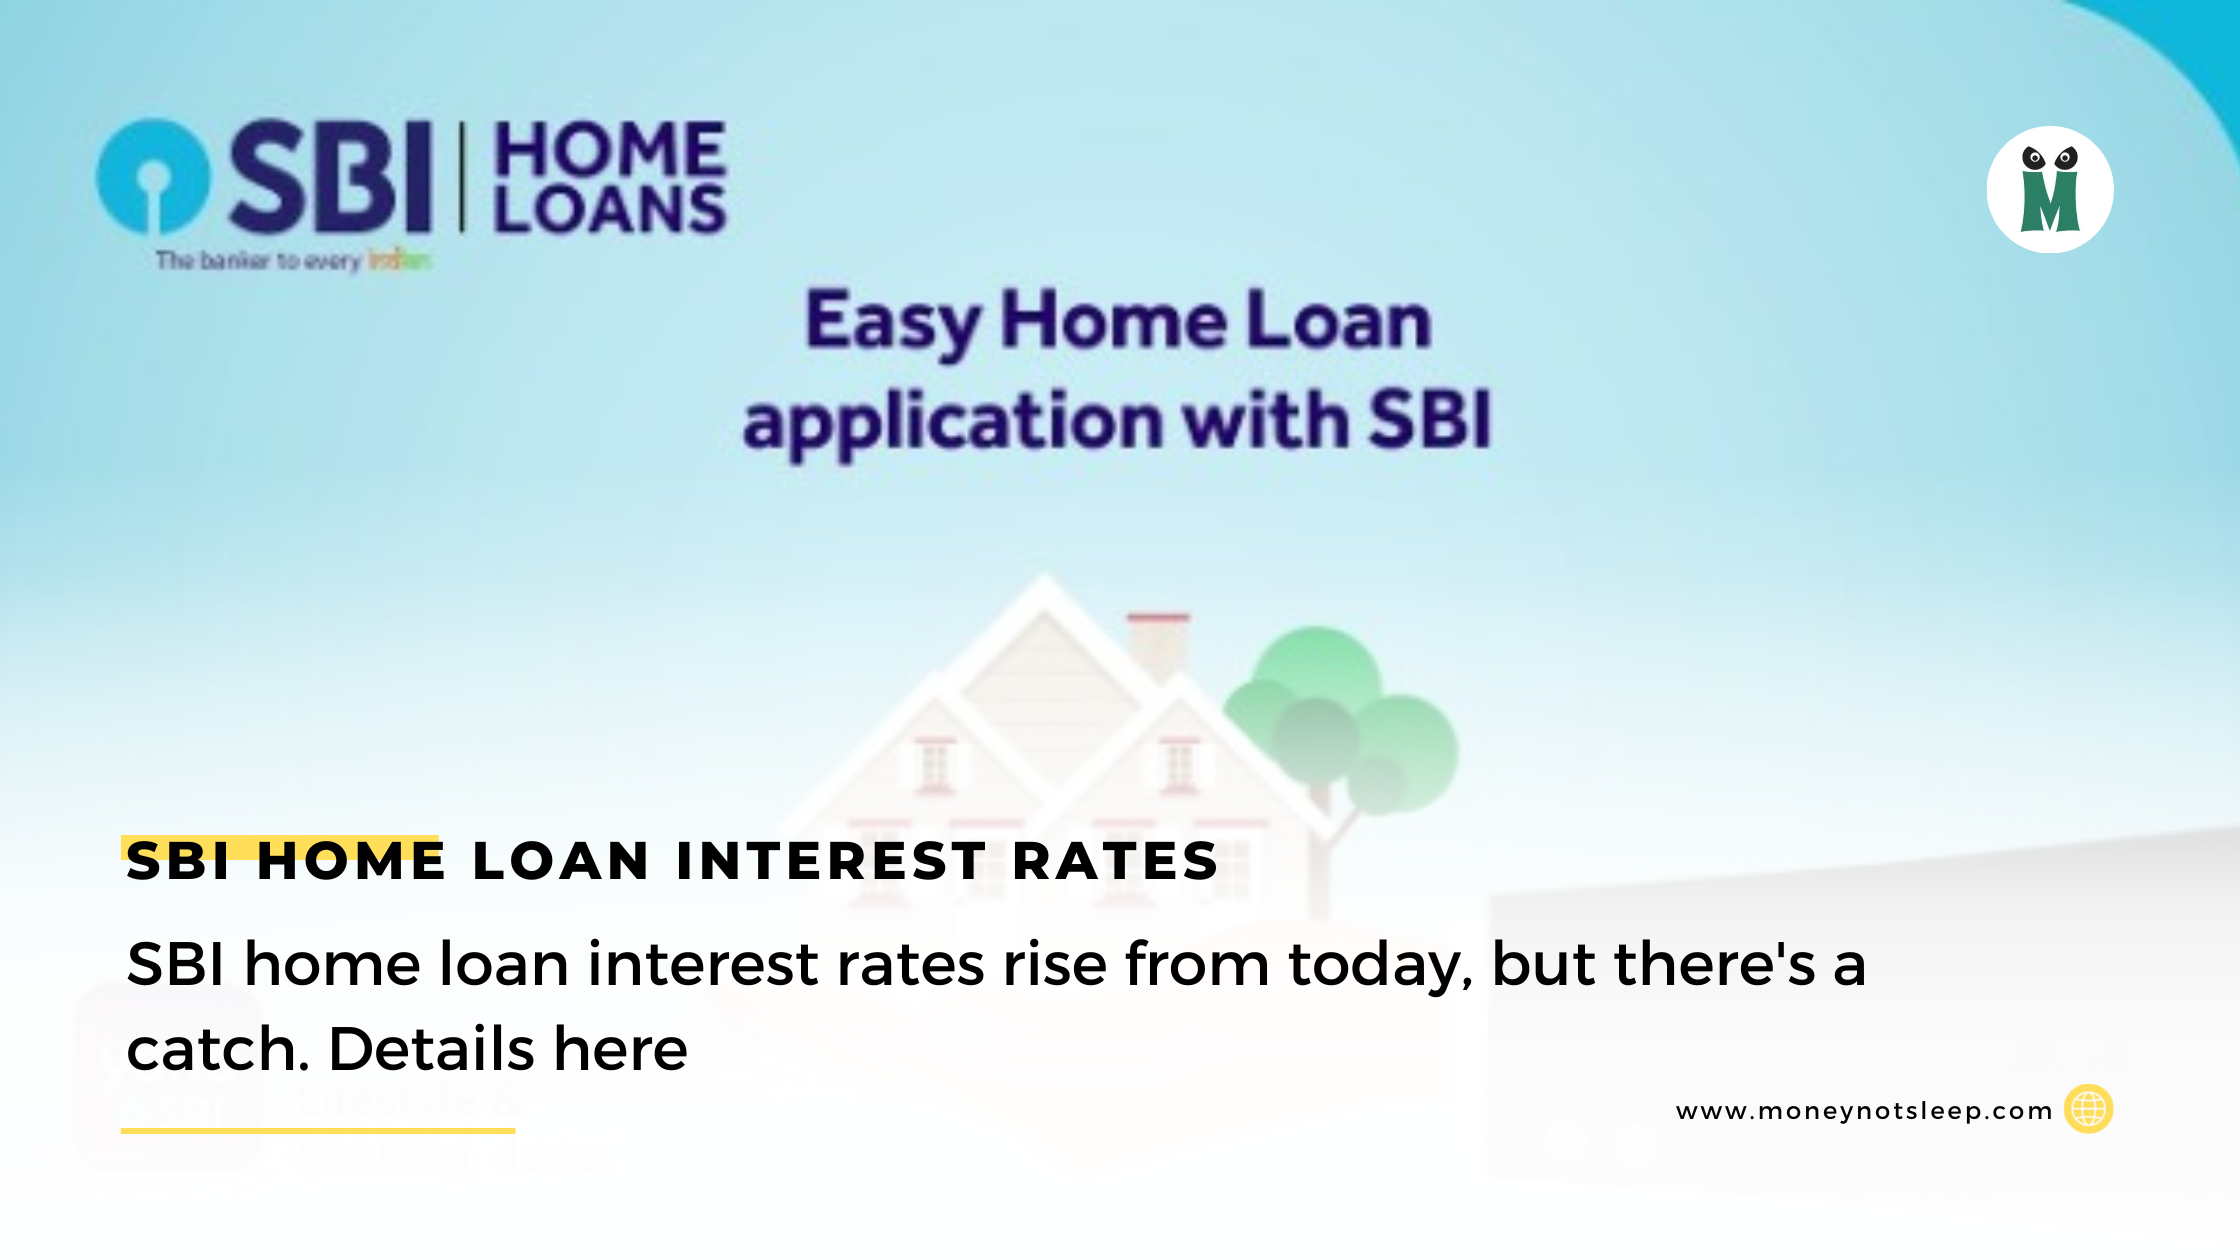 SBI home loan interest rates